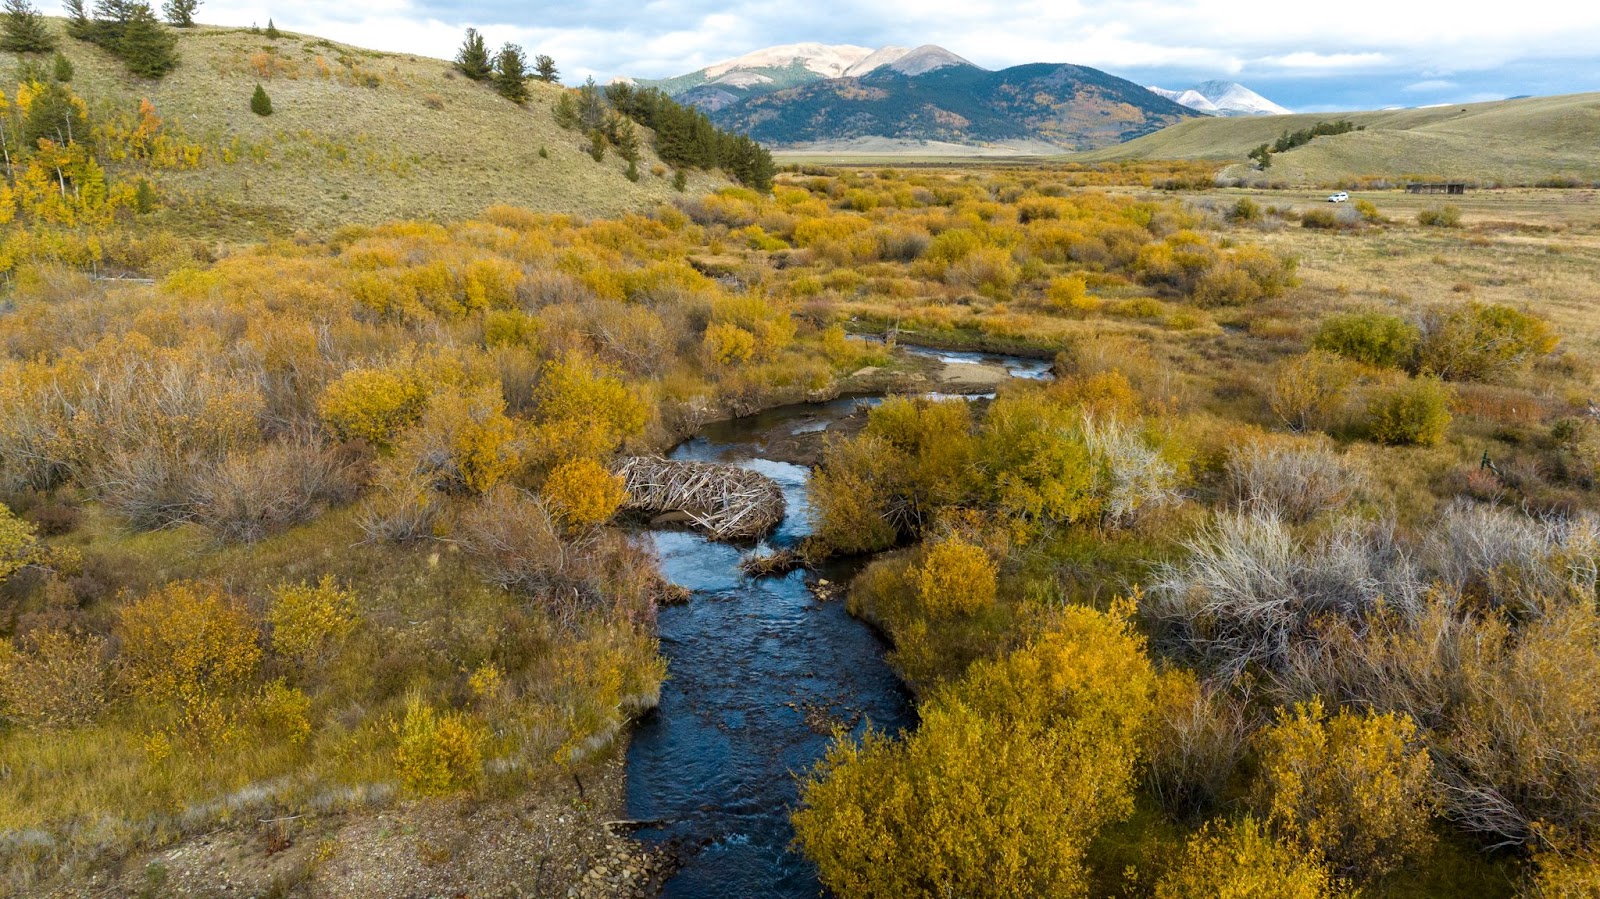 Photo of Tarryall Creek running through a field with mountains in the background.